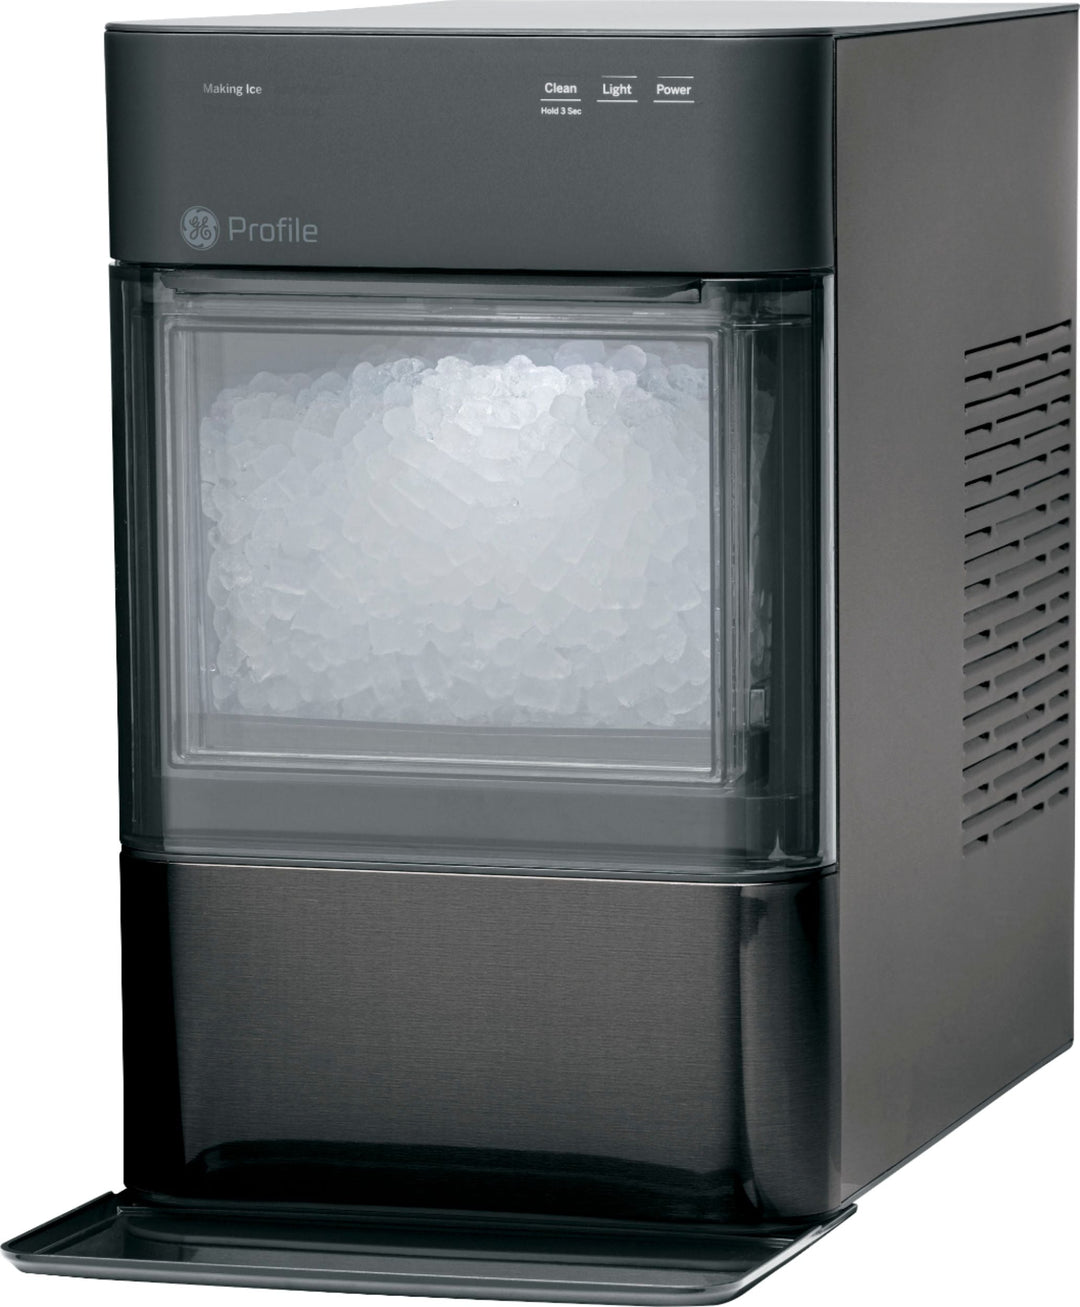 GE Profile - Opal 2.0 24 lb. Portable Ice maker with Nugget Ice Production and Built-In WiFi - Black stainless steel_6